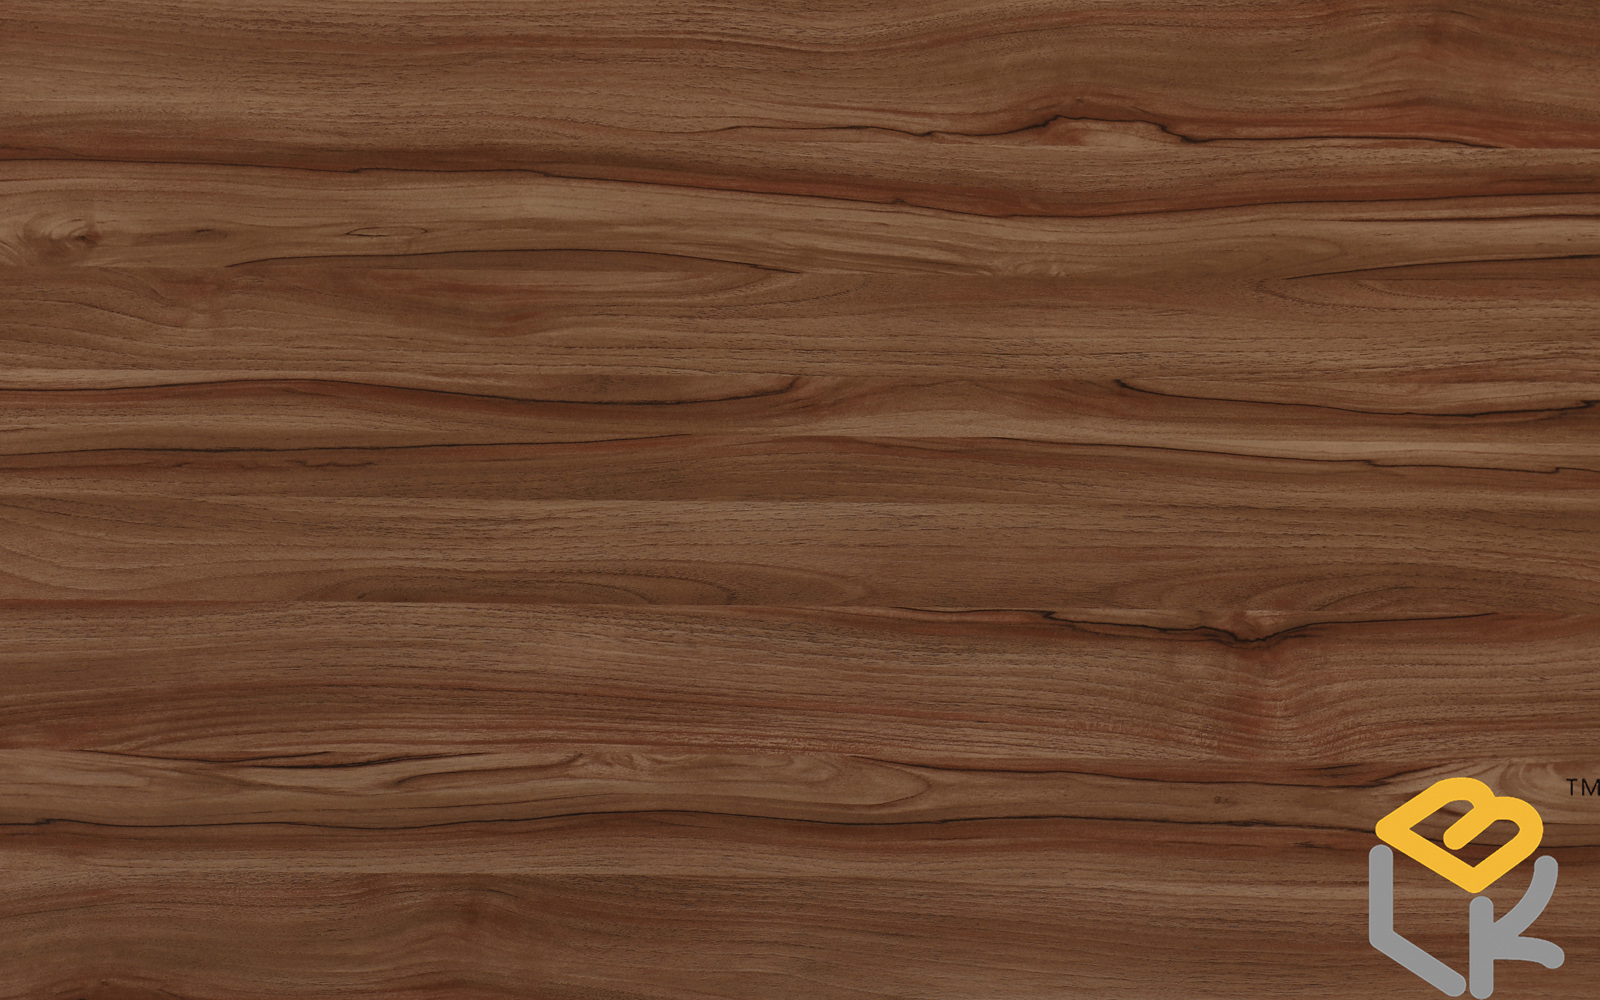 China woodgrain melamine faced plywood from BLK